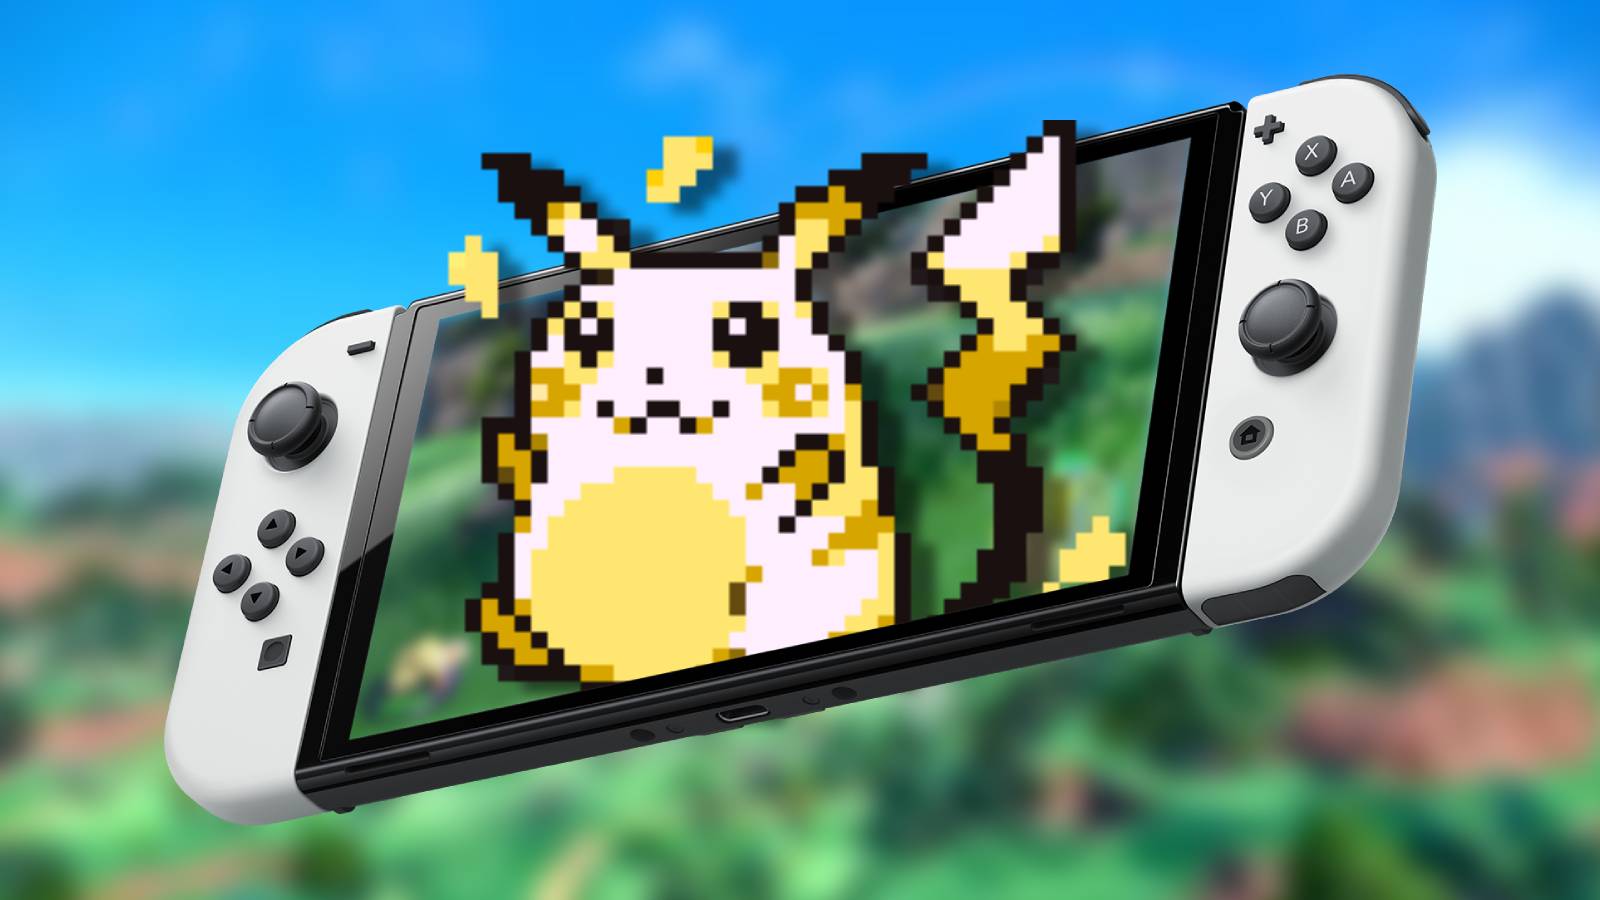 A pixelated version of the classic Pokemon Pikachu appears to be coming out of a Nintendo Switch OLED